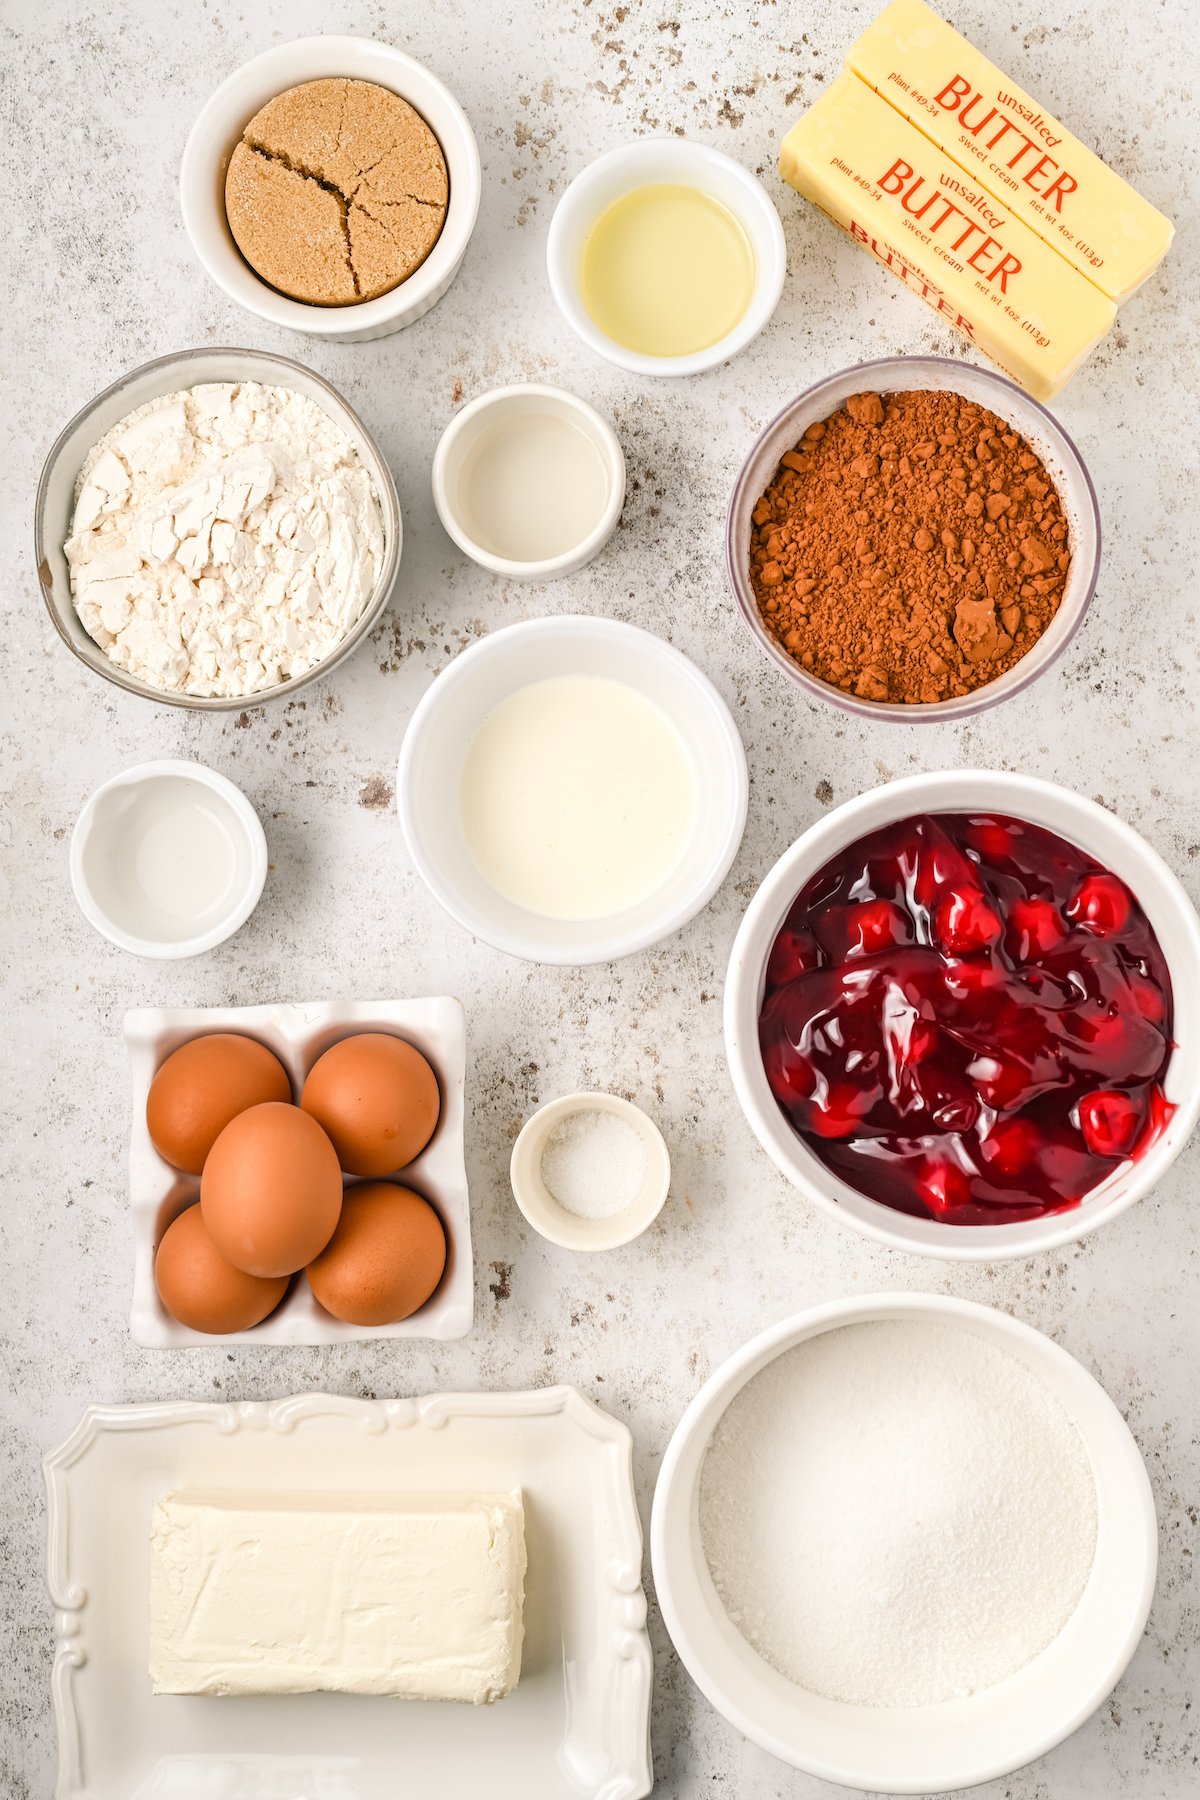 All the ingredients to make cherry cheesecake brownies arranged in prep bowls.